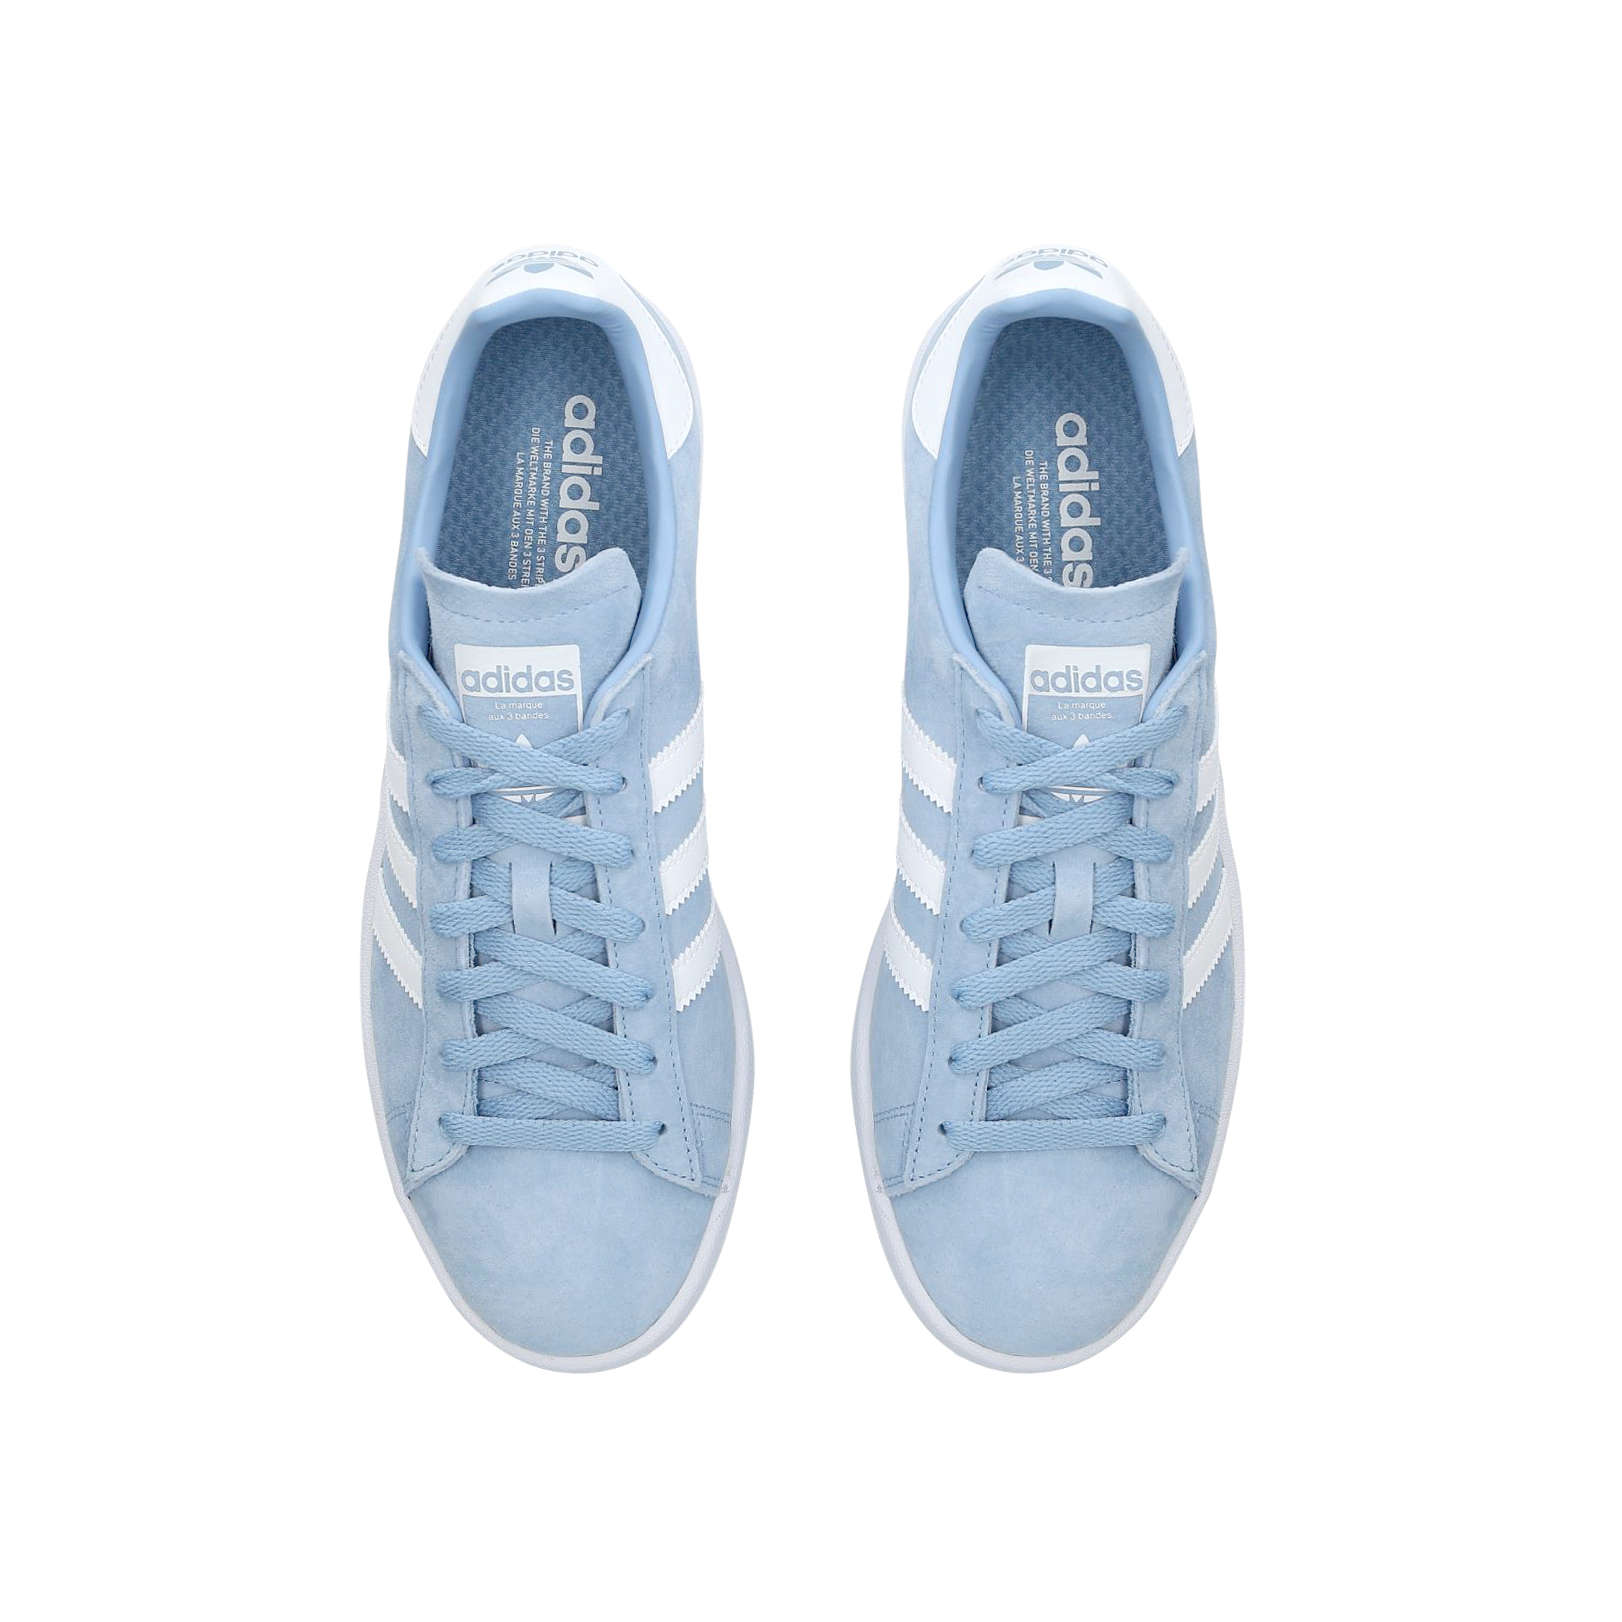 adidas pale blue campus suede trainers